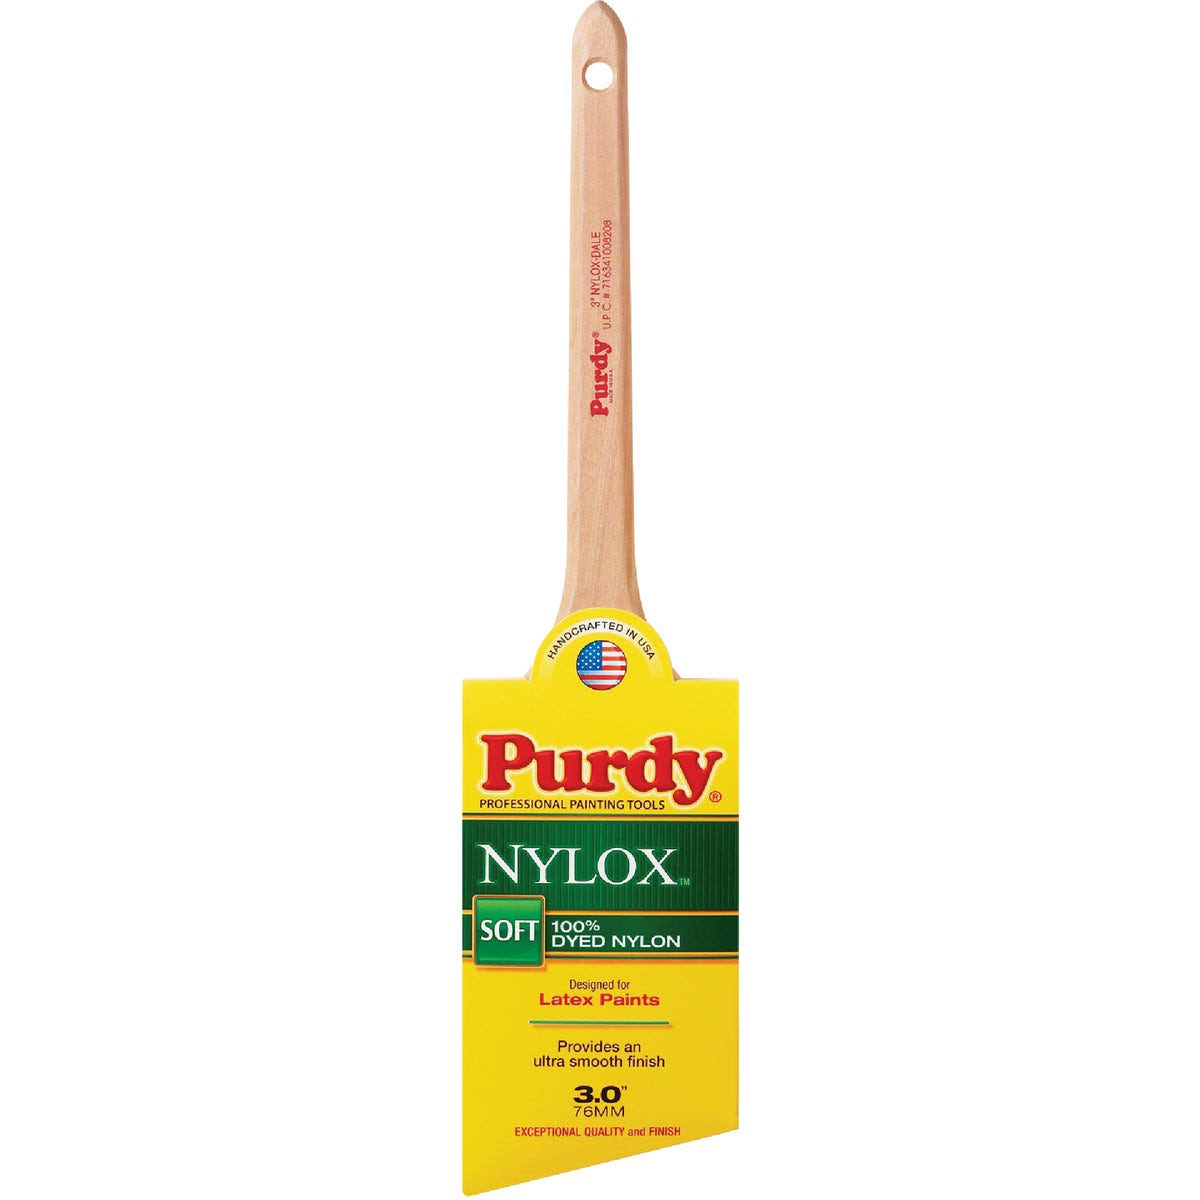 Purdy Professional Nylox-Dale Paint Brush - 3"